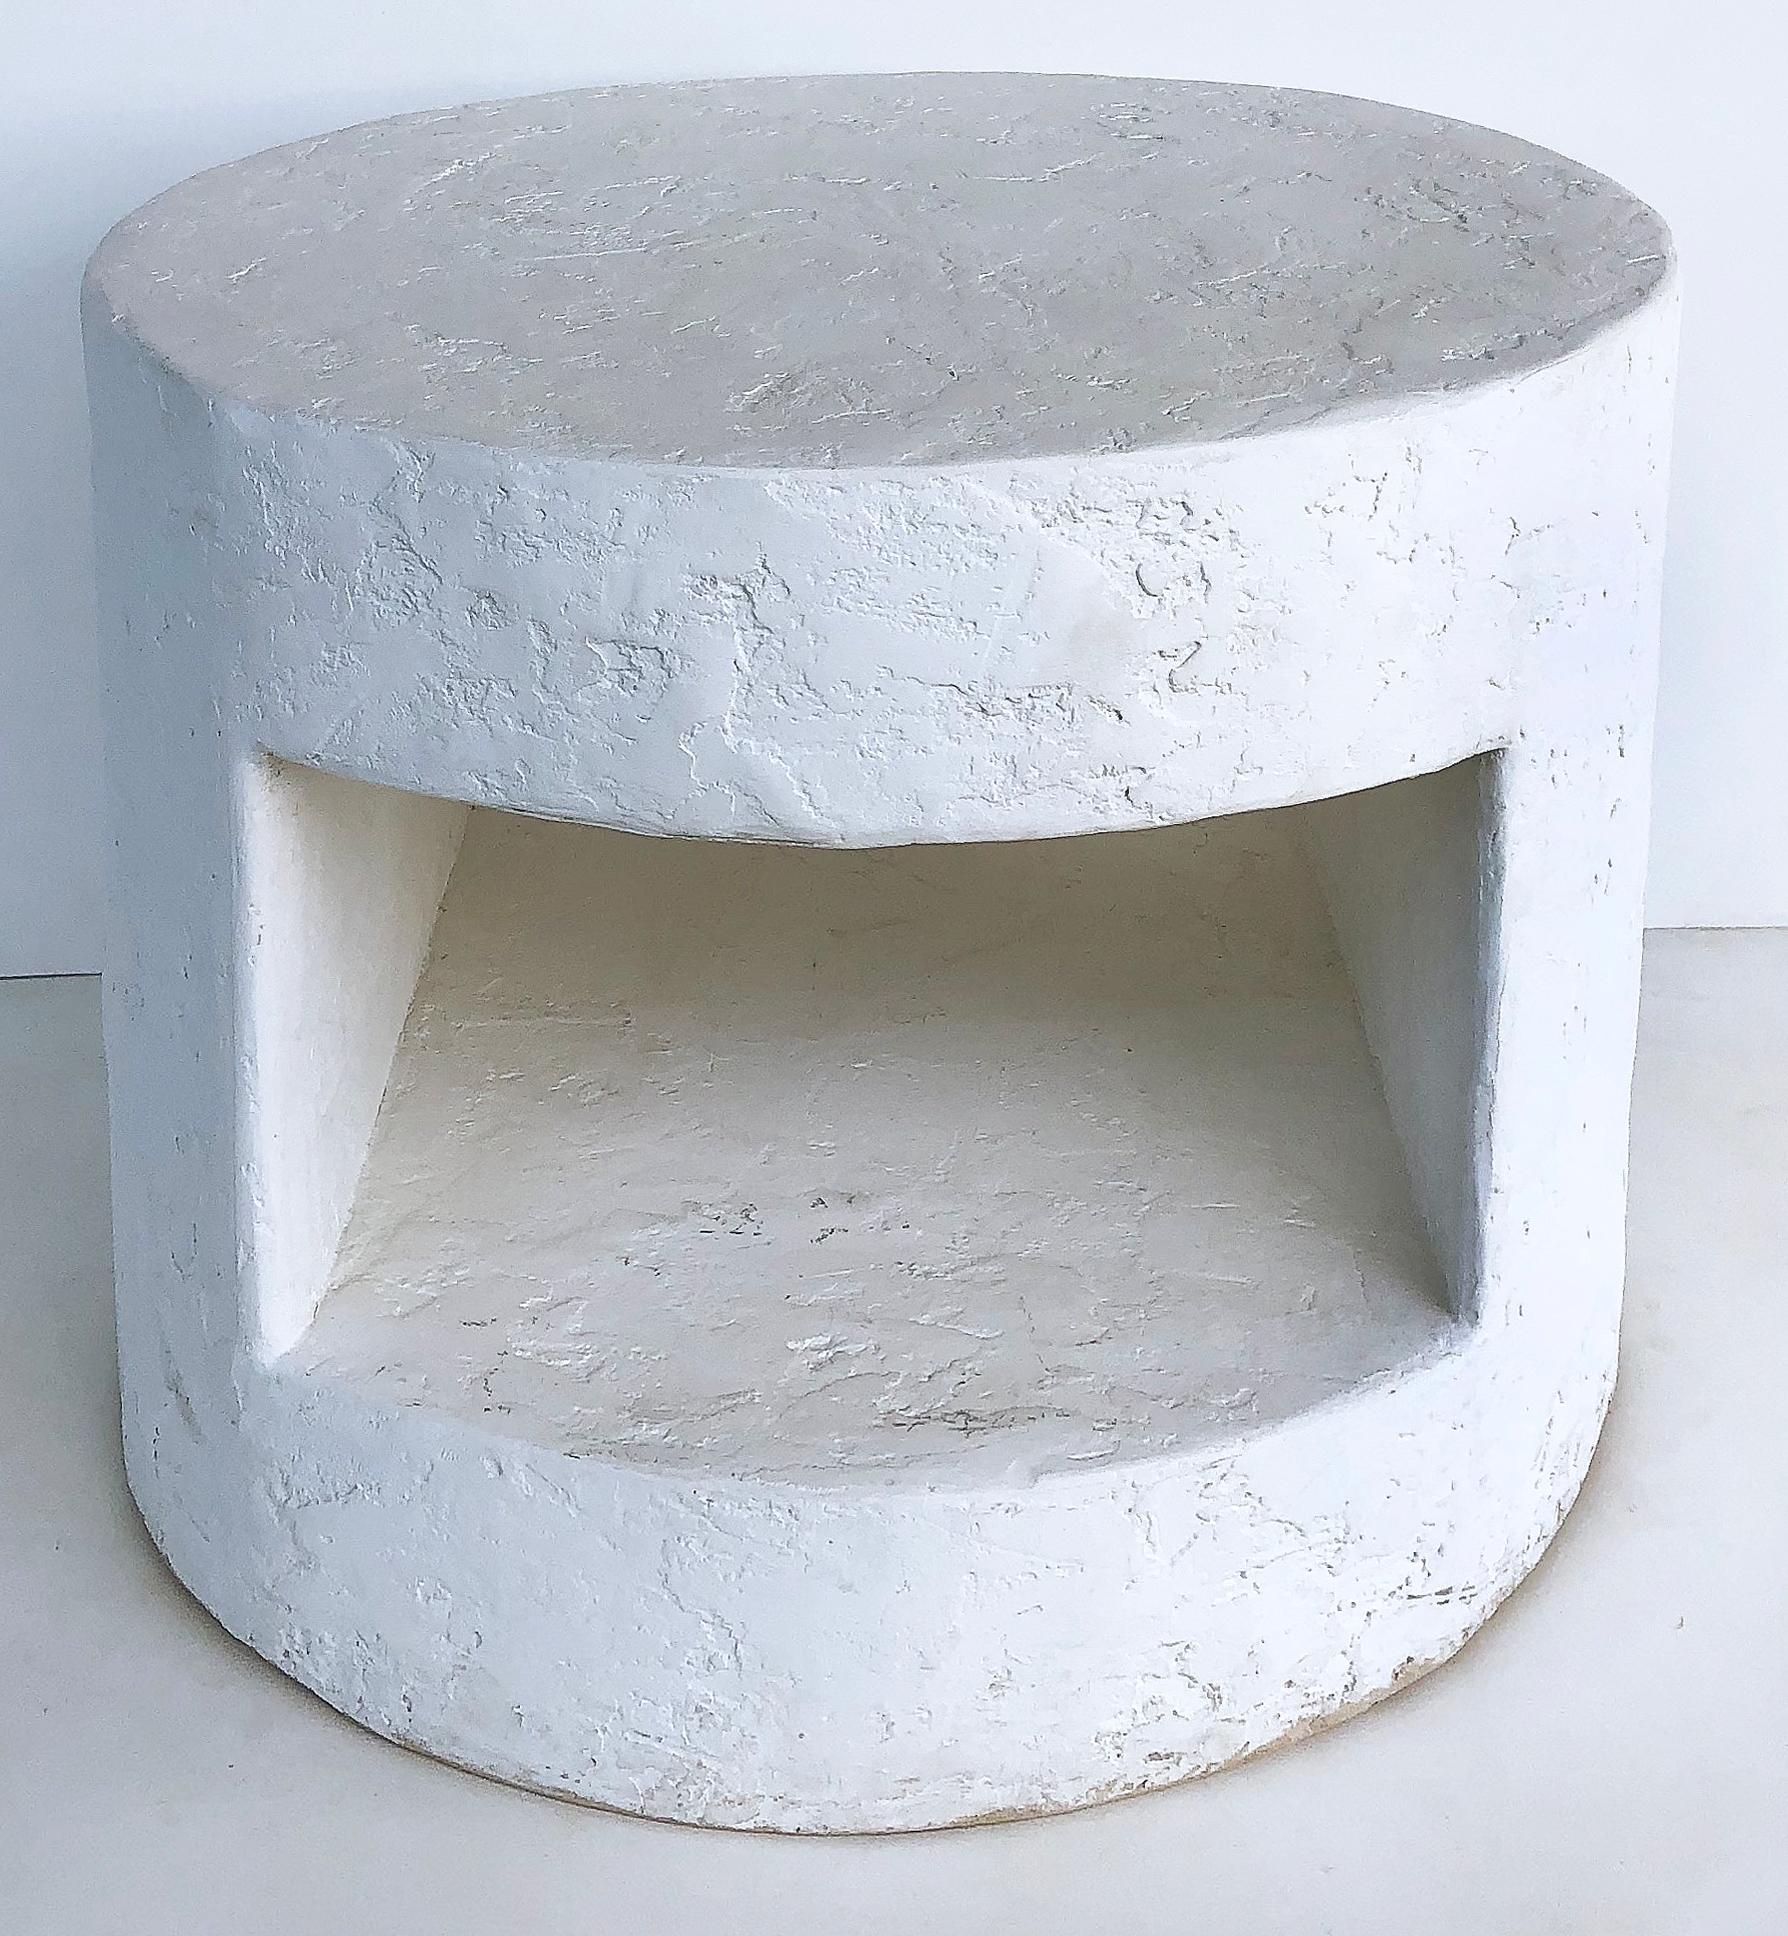 midcentury Gesso Finish Table Manner of John Dickinson.

Offered for sale is a Mid-Century Modern round side table with a gesso/plaster finish and a cut out interior. The table is in the manner of John Dickinson. Possibly gesso or plaster over